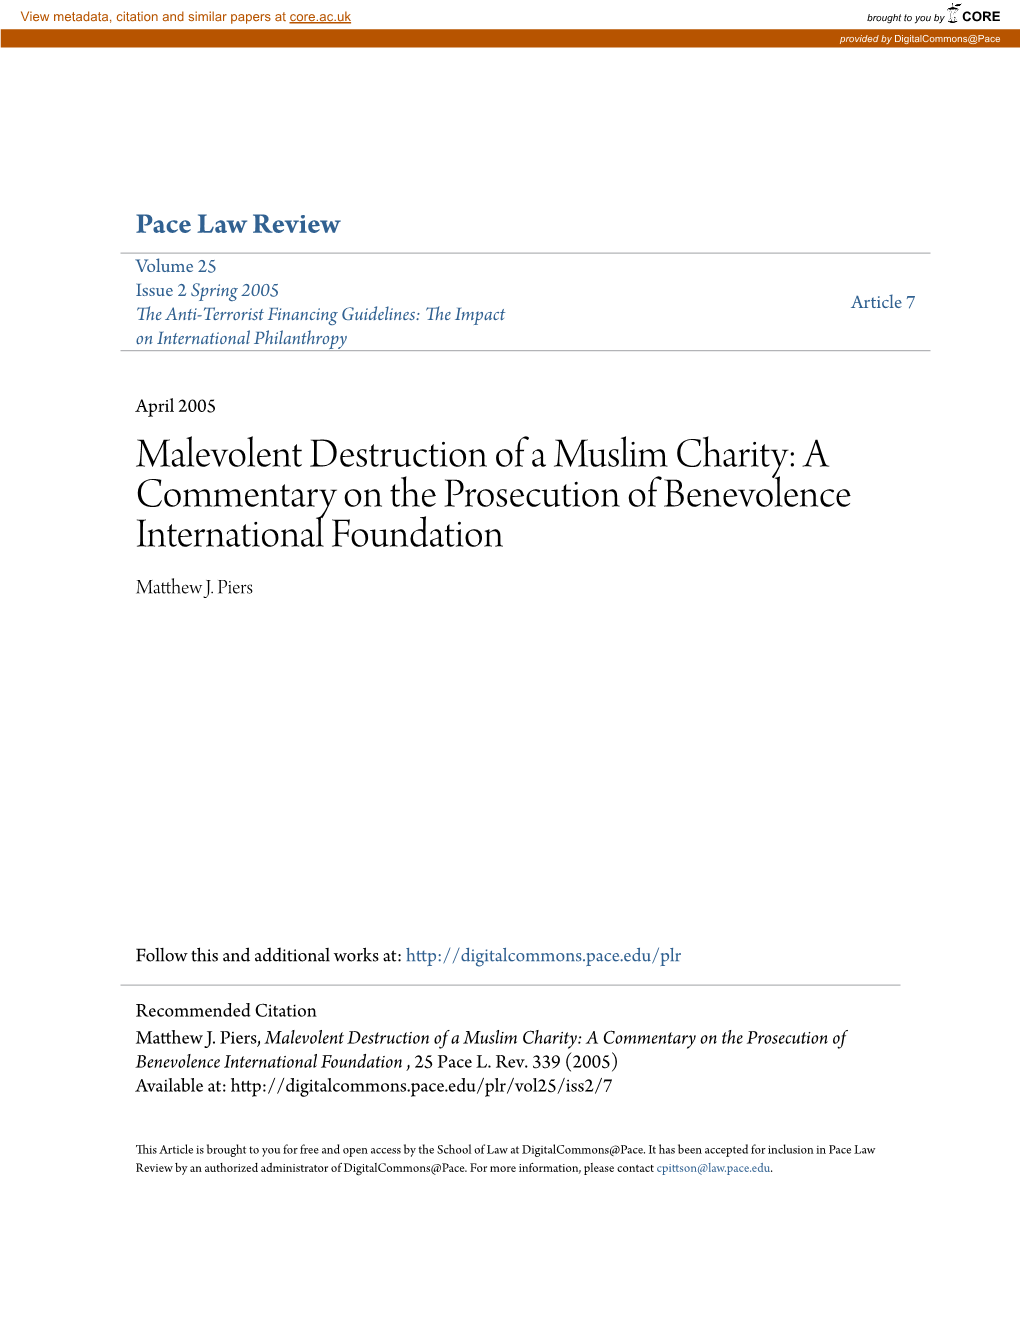 A Commentary on the Prosecution of Benevolence International Foundation Matthew .J Piers